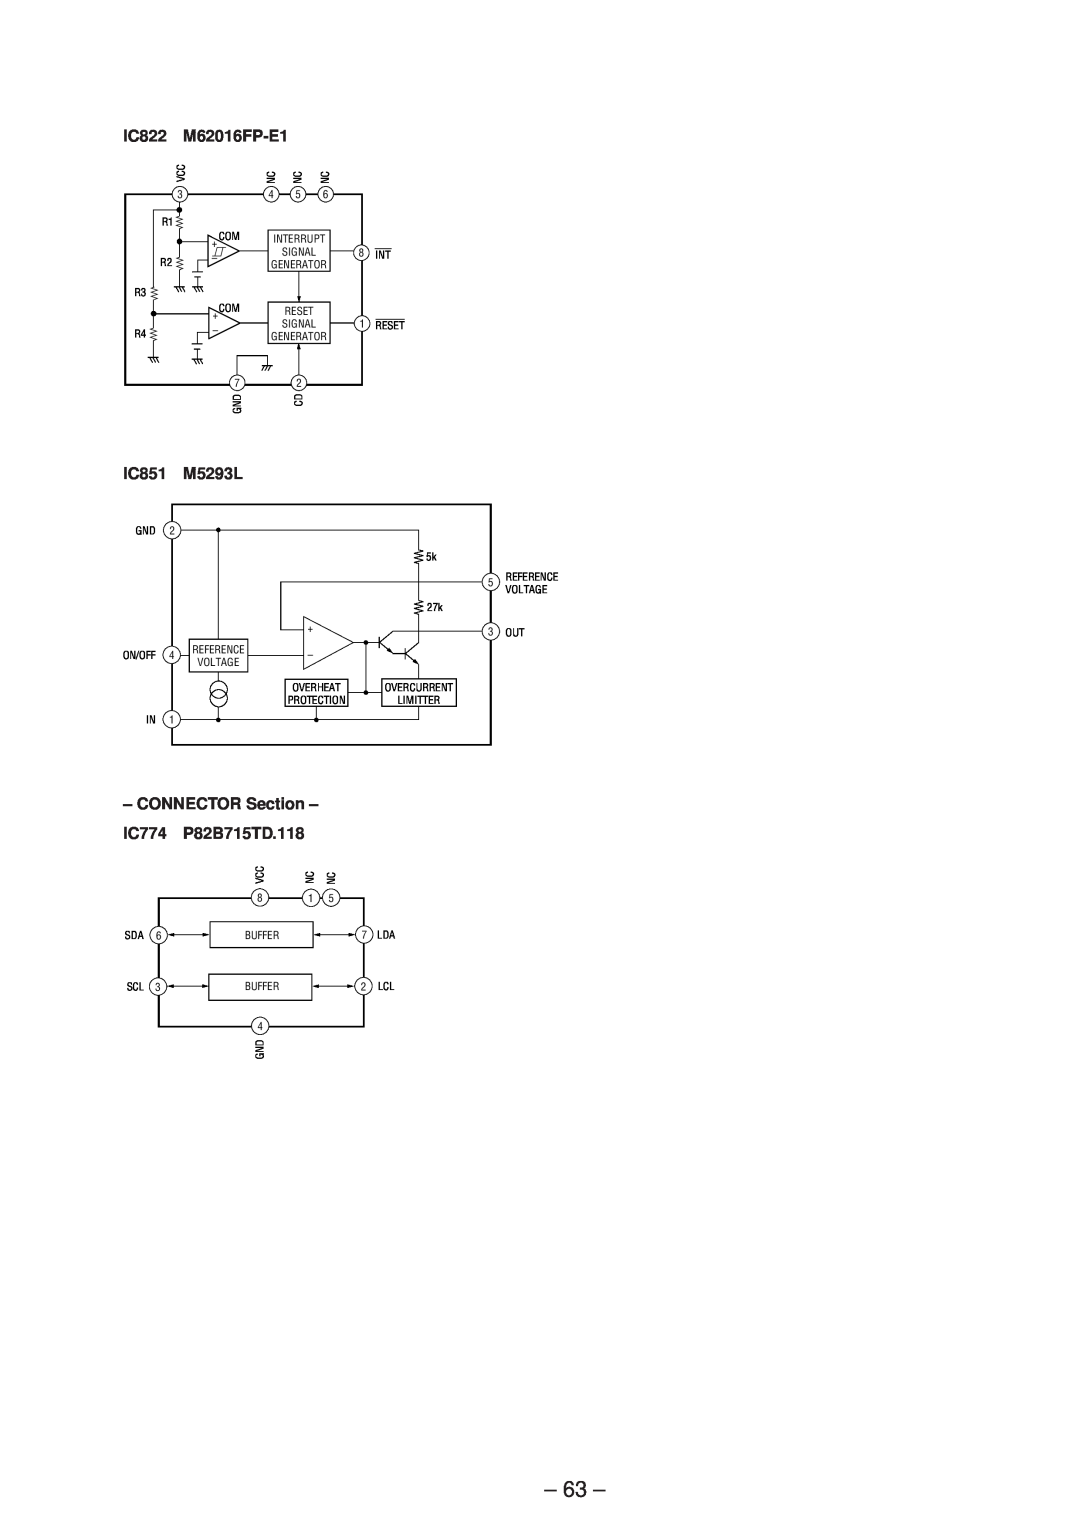 Sony MDS-SD1 service manual IC822, M62016FP-E1, IC851, M5293L, CONNECTOR Section, IC774, P82B715TD.118 